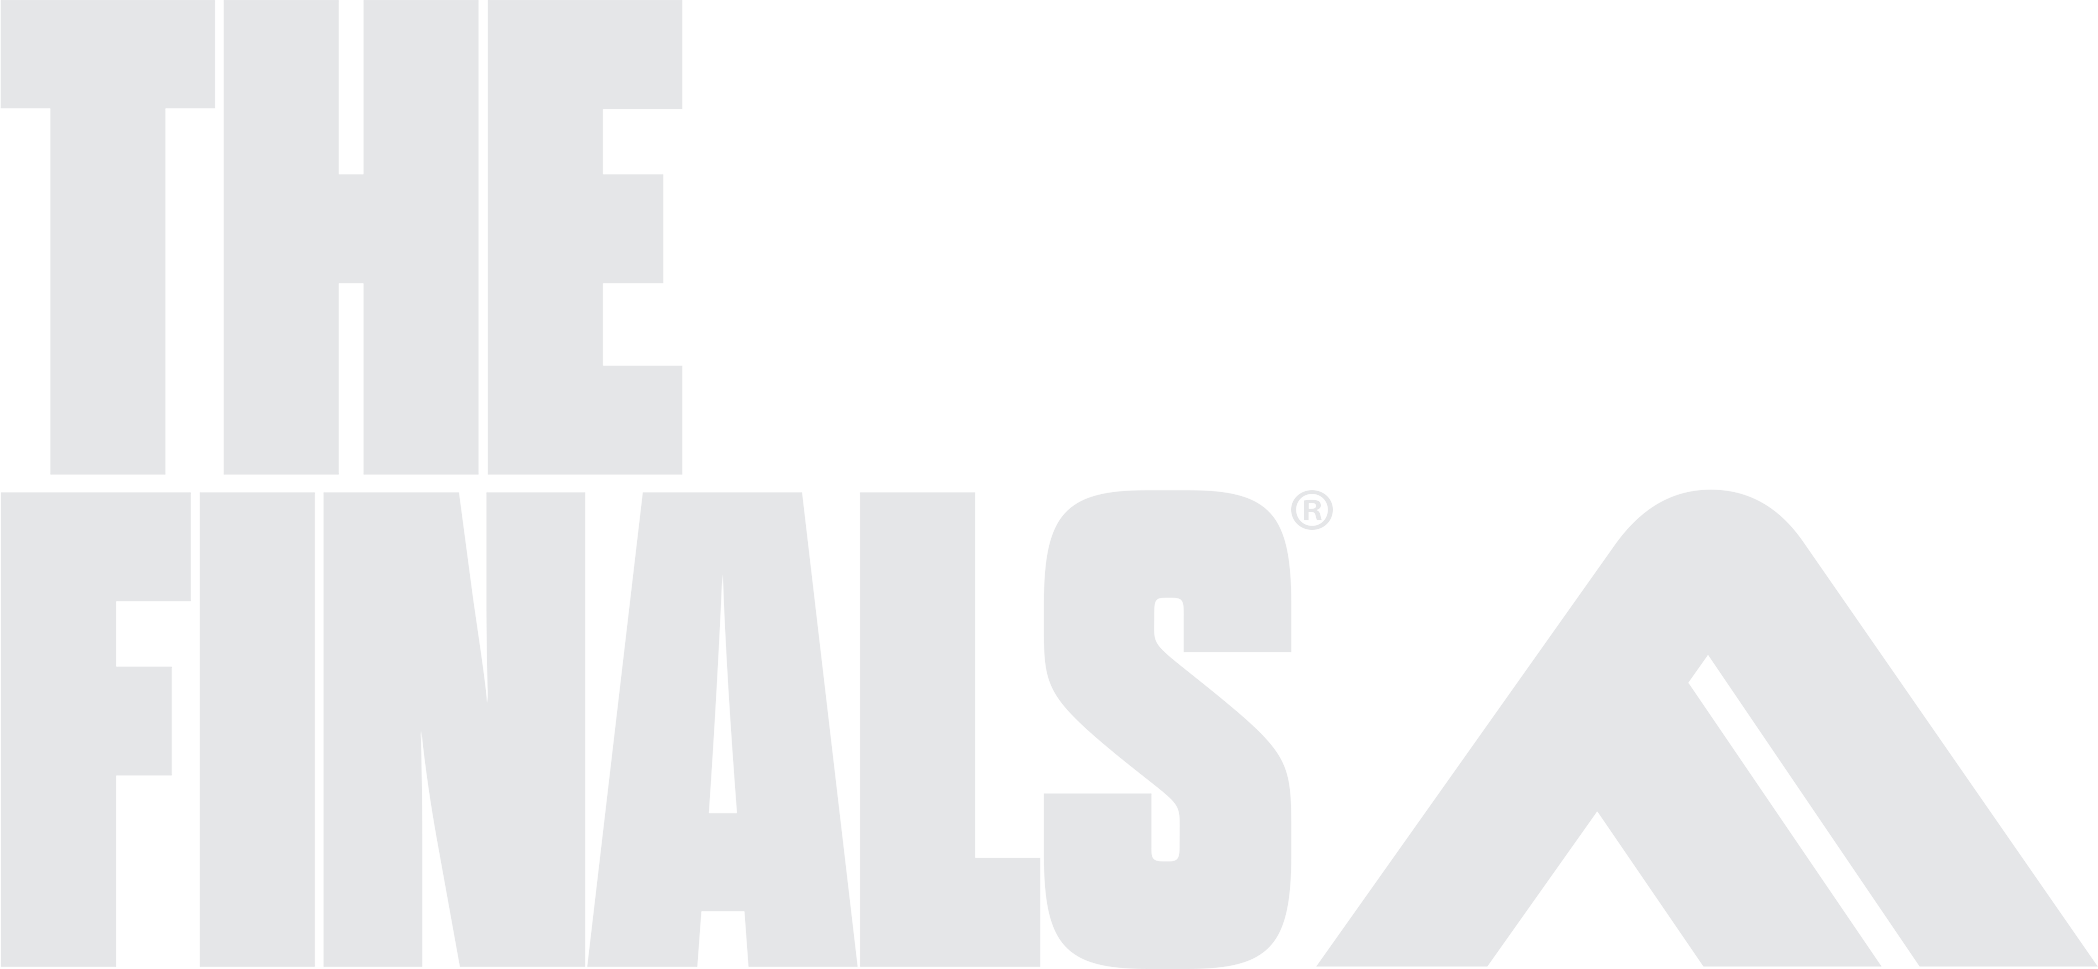 Is The Finals available on PS5? Is The Finals free to play